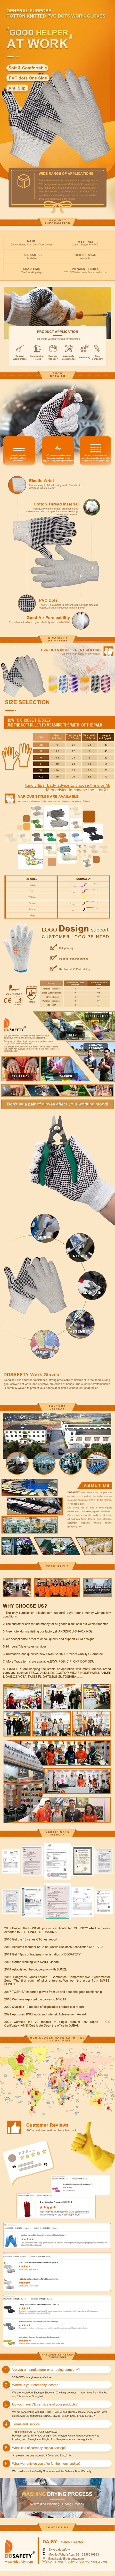 White Cotton Polyester PVC Dotted String Knit Work Gloves Yellow pvc dots one side -DKP318 White Cotton Polyester PVC Dotted String Knit Work Gloves Yellow pvc dots one side -DKP318 gloves,work gloves,cotton work gloves,pvc dot gloves,PVC Dot Work Gloves